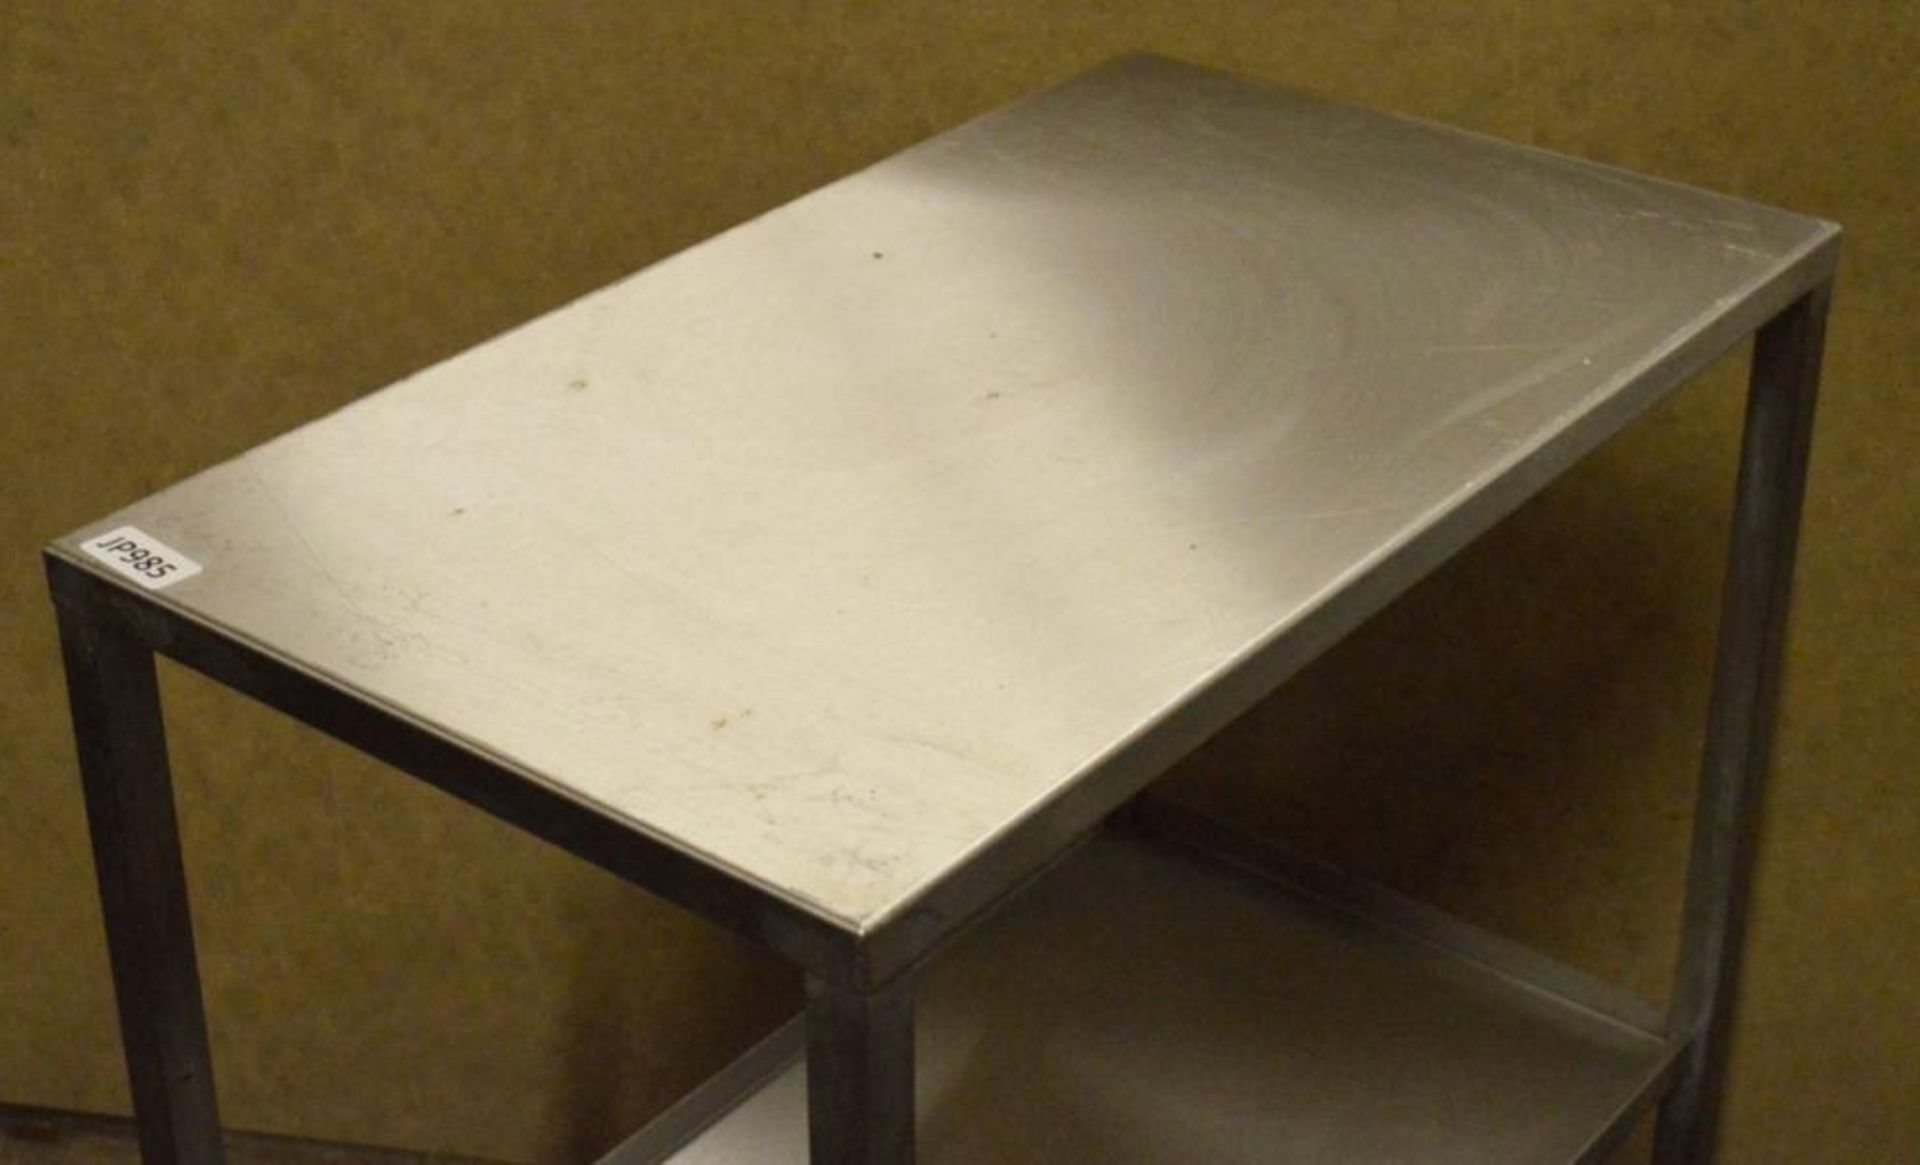 1 x Stainless Steel Prep Table With Undershelf - H83 x W40 x D70 cms - CL282 - Ref JP985 - Location: - Image 2 of 3